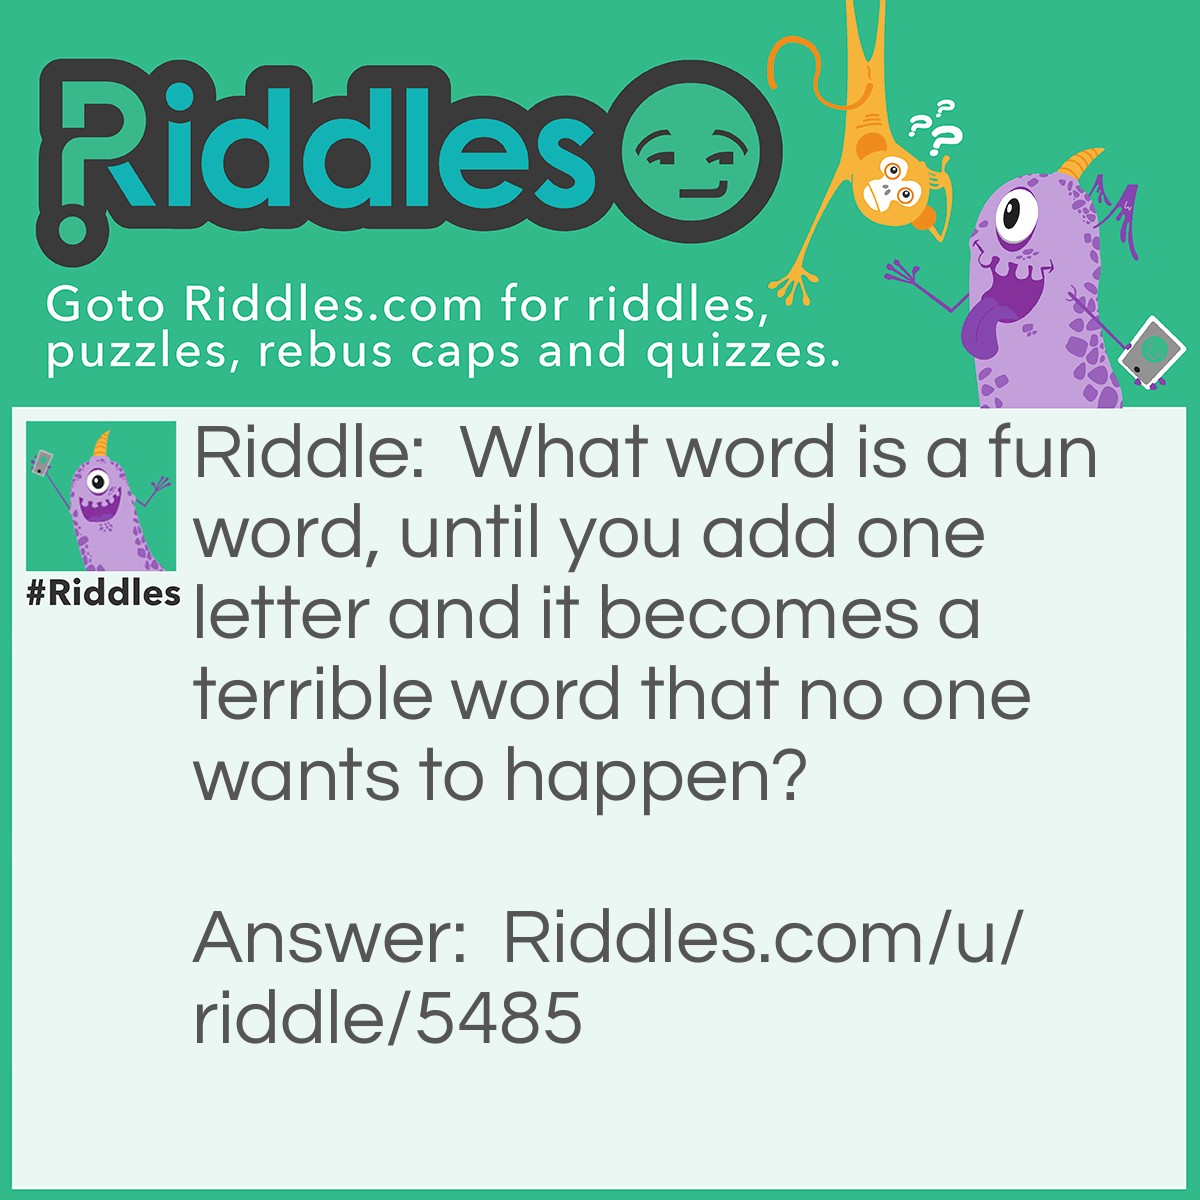 Riddle: What word is a fun word, until you add one letter and it becomes a terrible word that no one wants to happen? Answer: Laughter: If you add a 'S' to the begging of laughter it becomes slaughter.